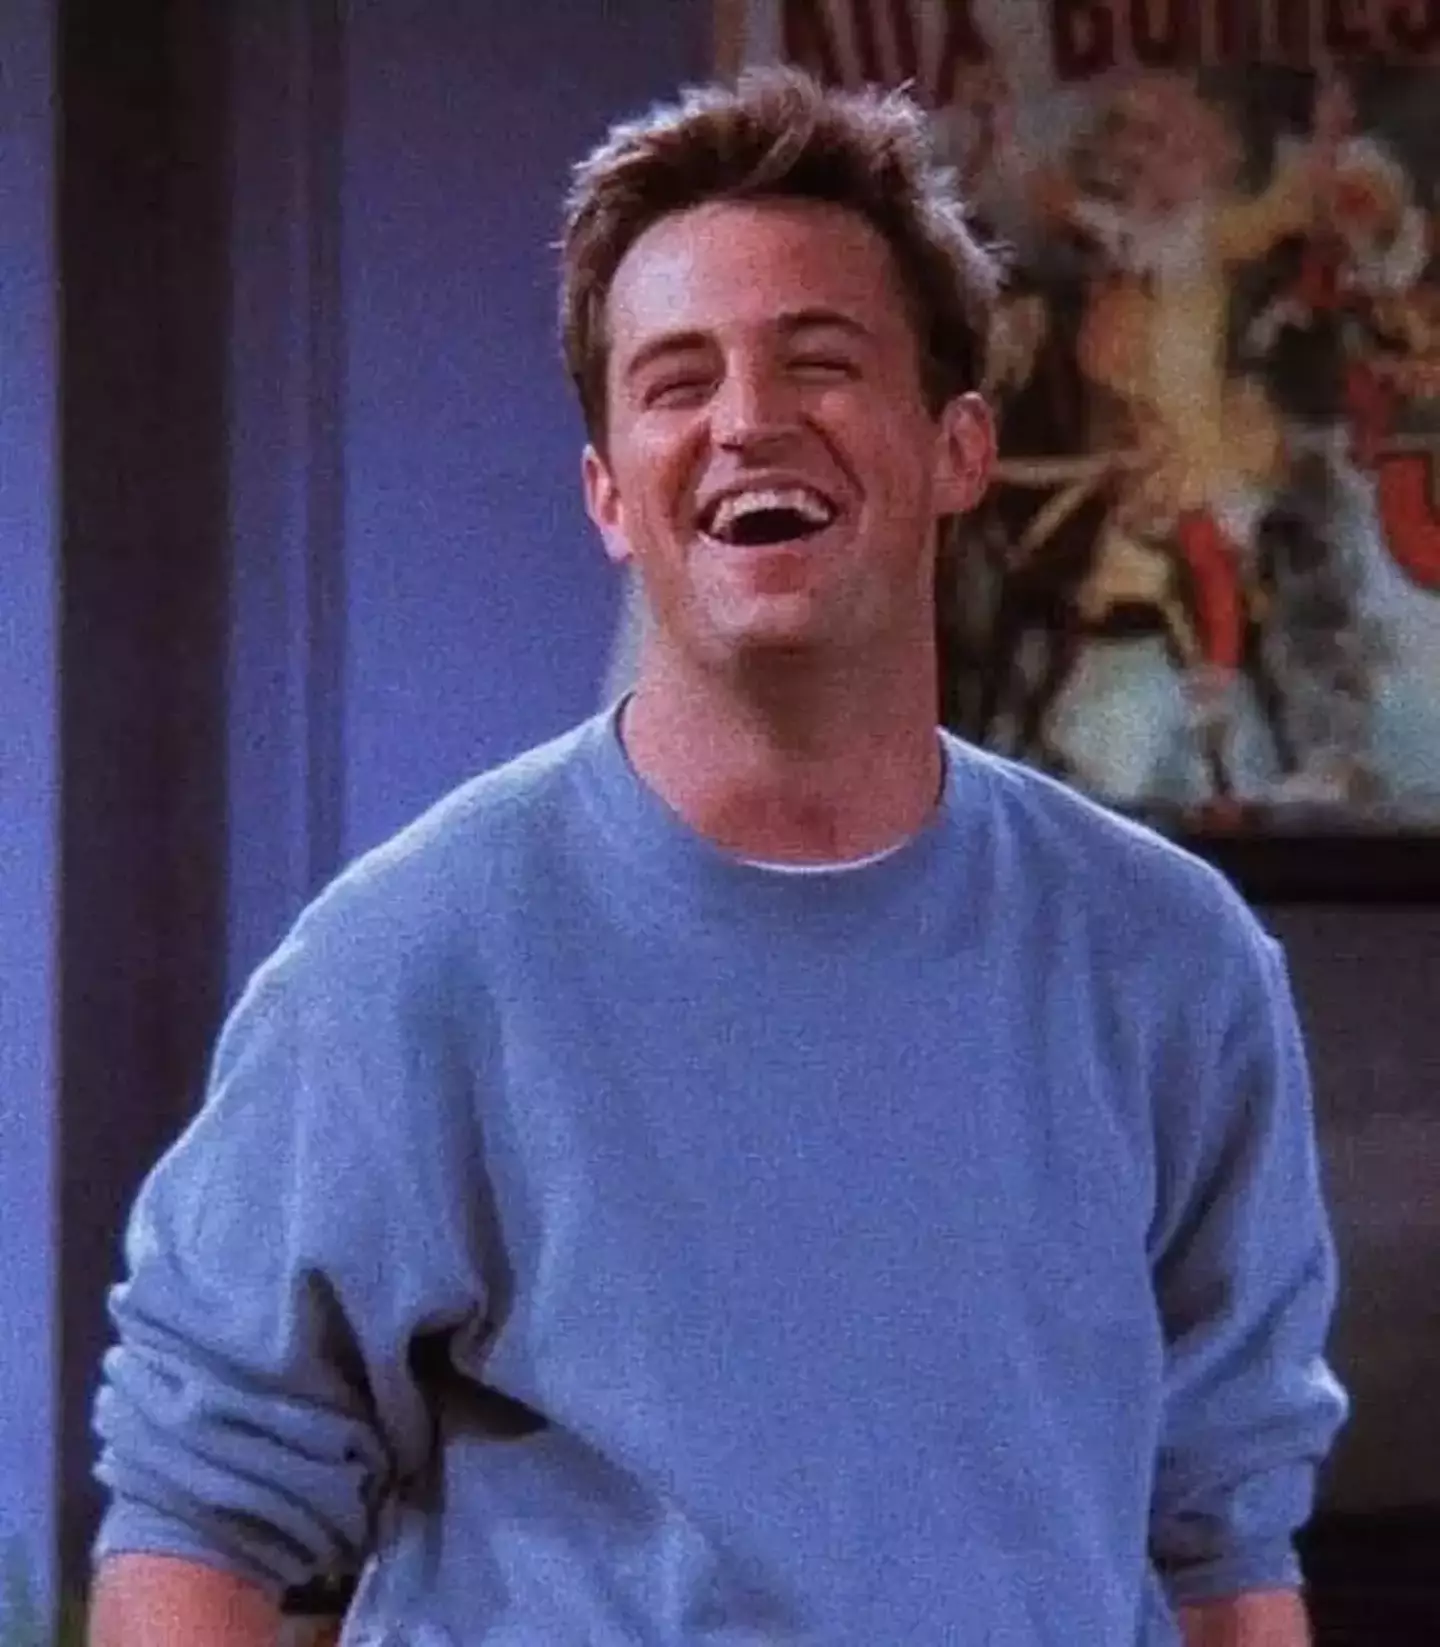 The star played Chandler Bing on Friends.